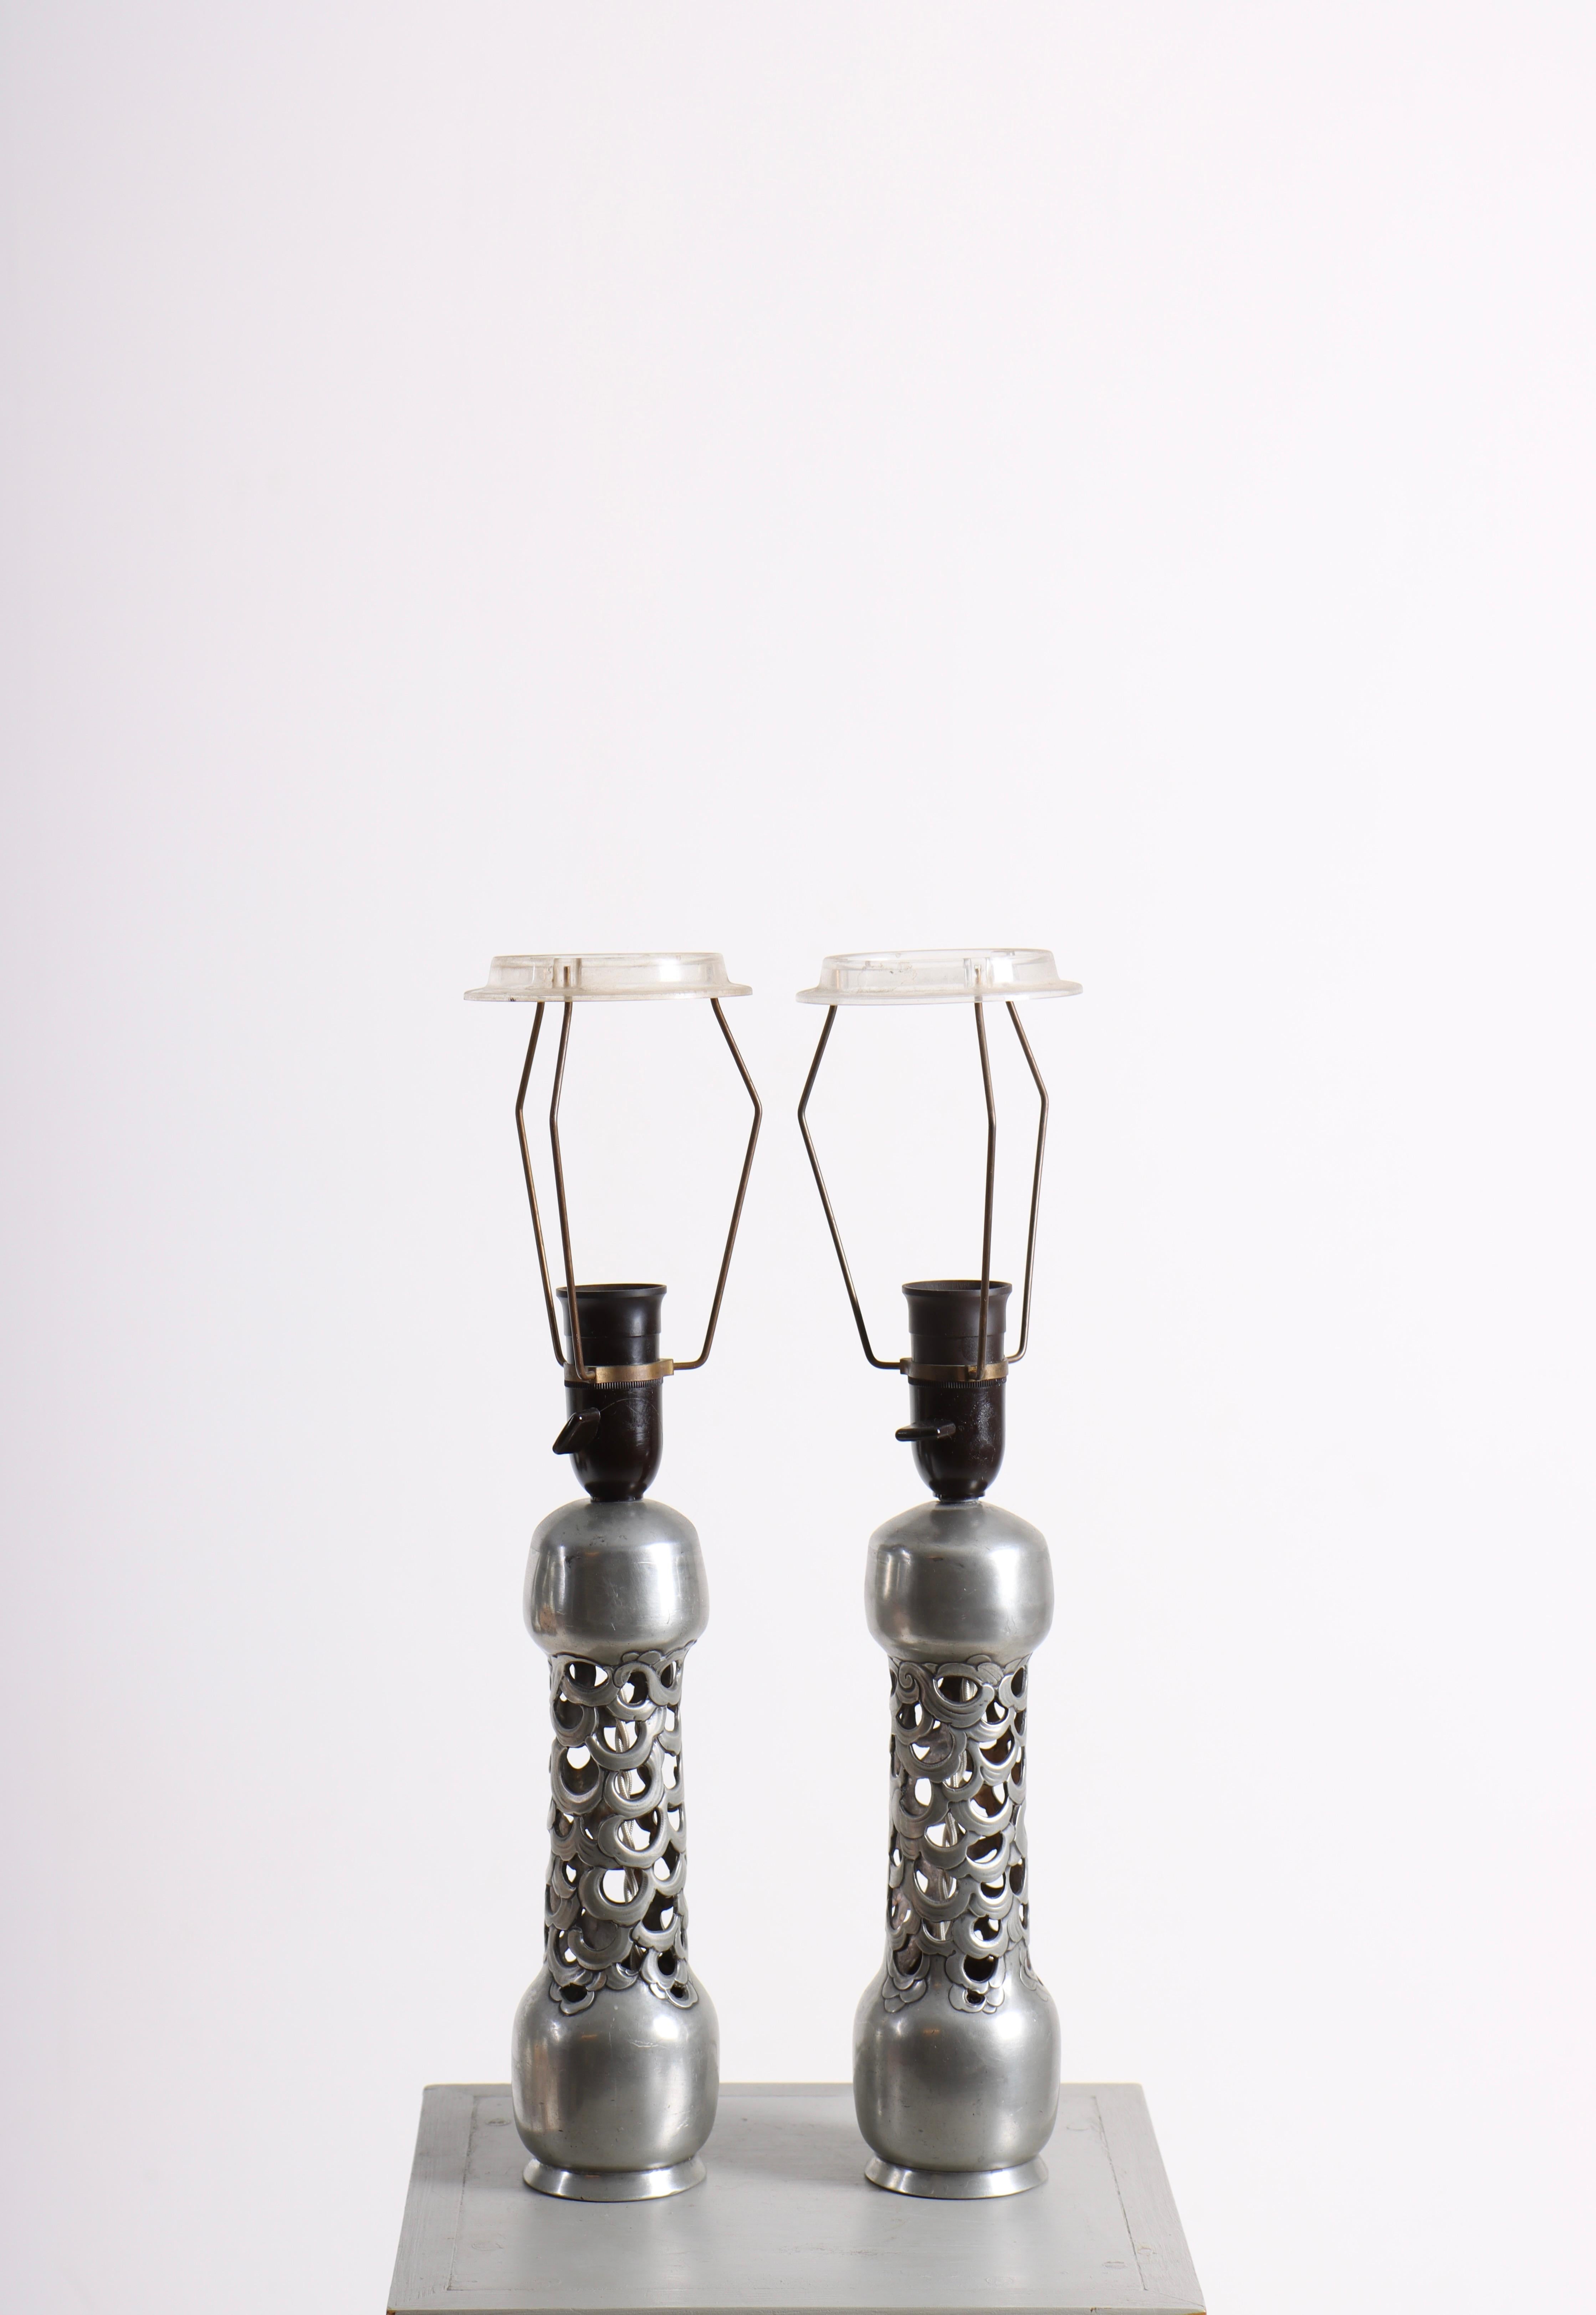 Scandinavian Modern Pair of Patinated Tin Table Lamps by Mogens Ballin, 1930s